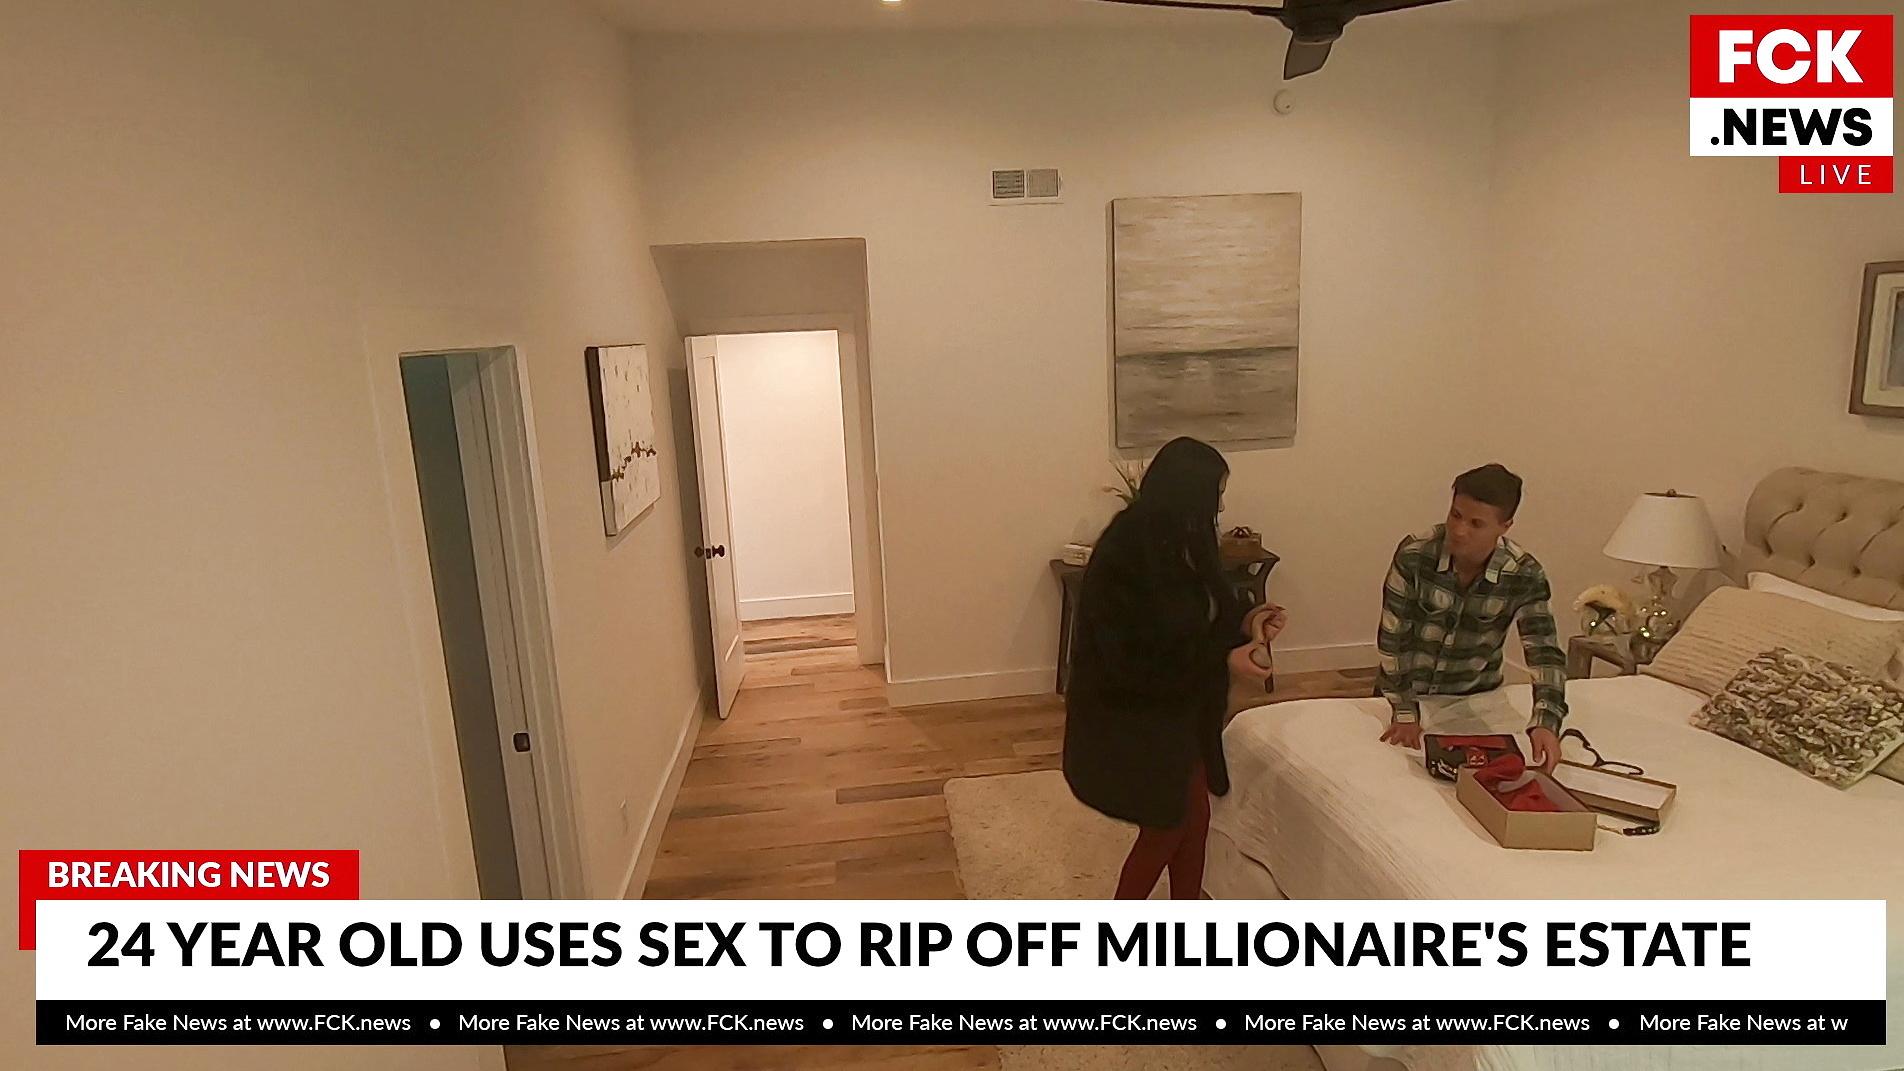 Carolina Cortez uses sex to steal from a millionaire bang image pic